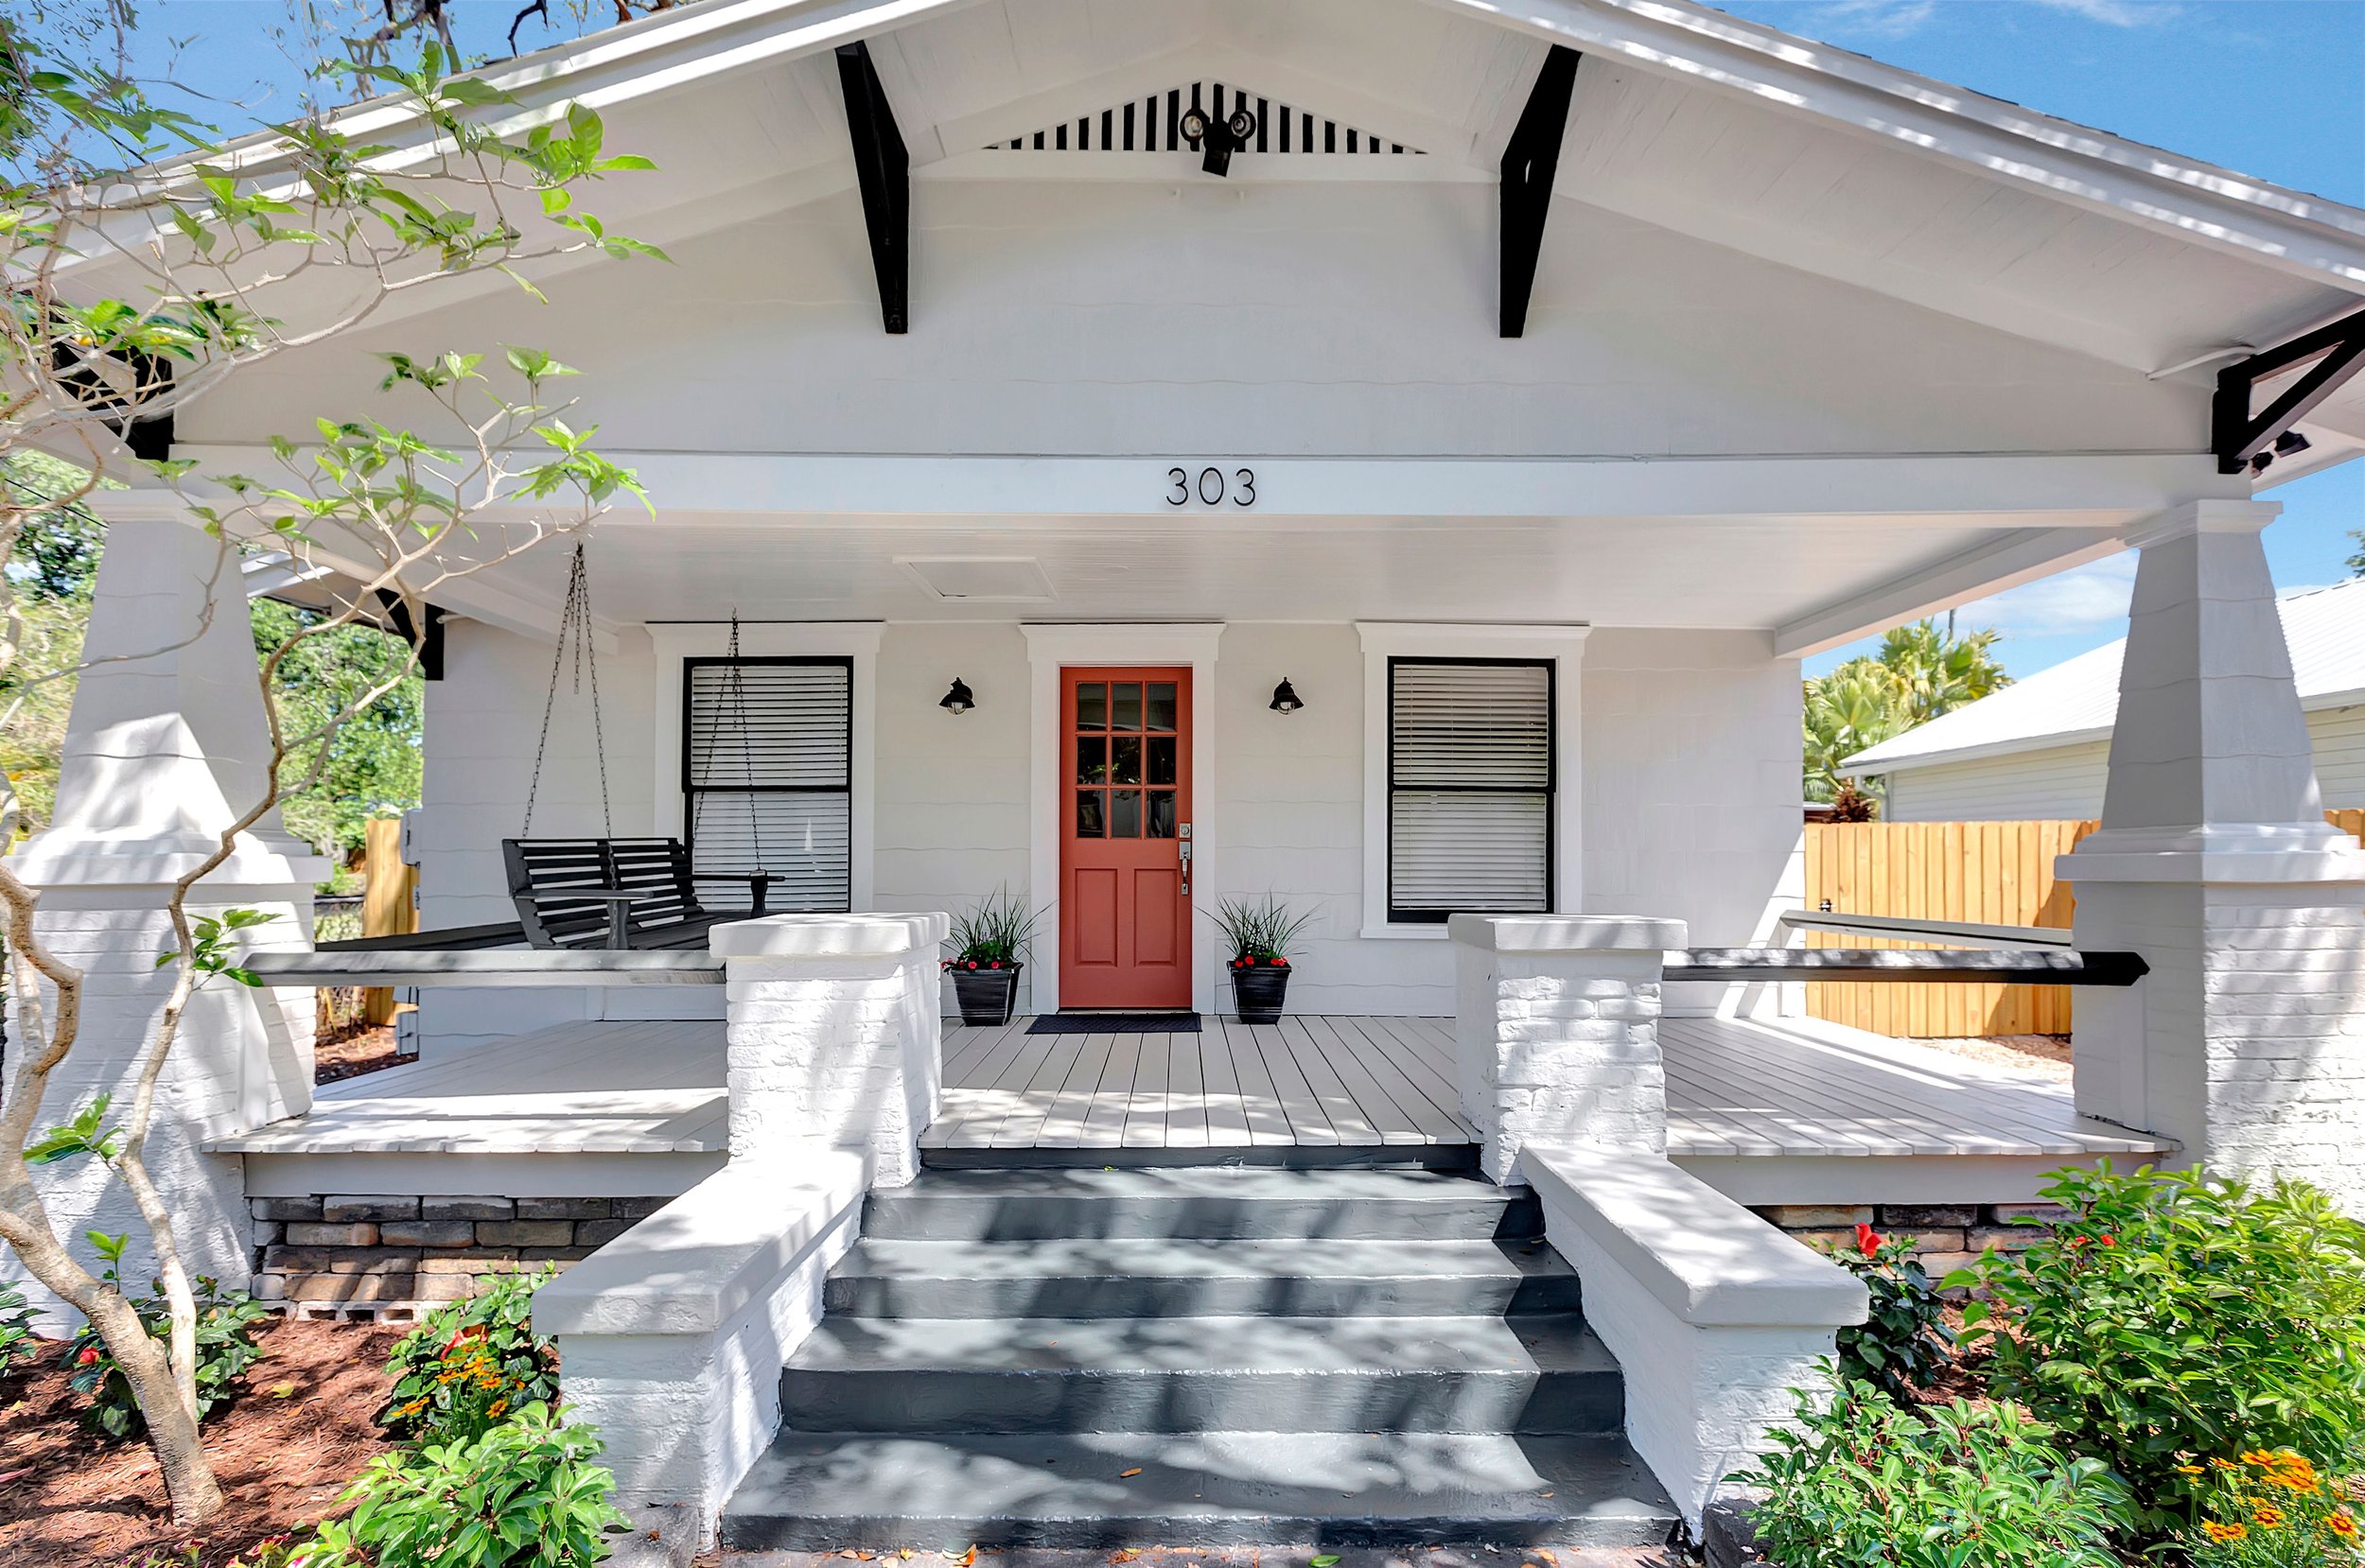 303 W Hanna Avenue - Old Seminole Heights - SOLD in May, 2021